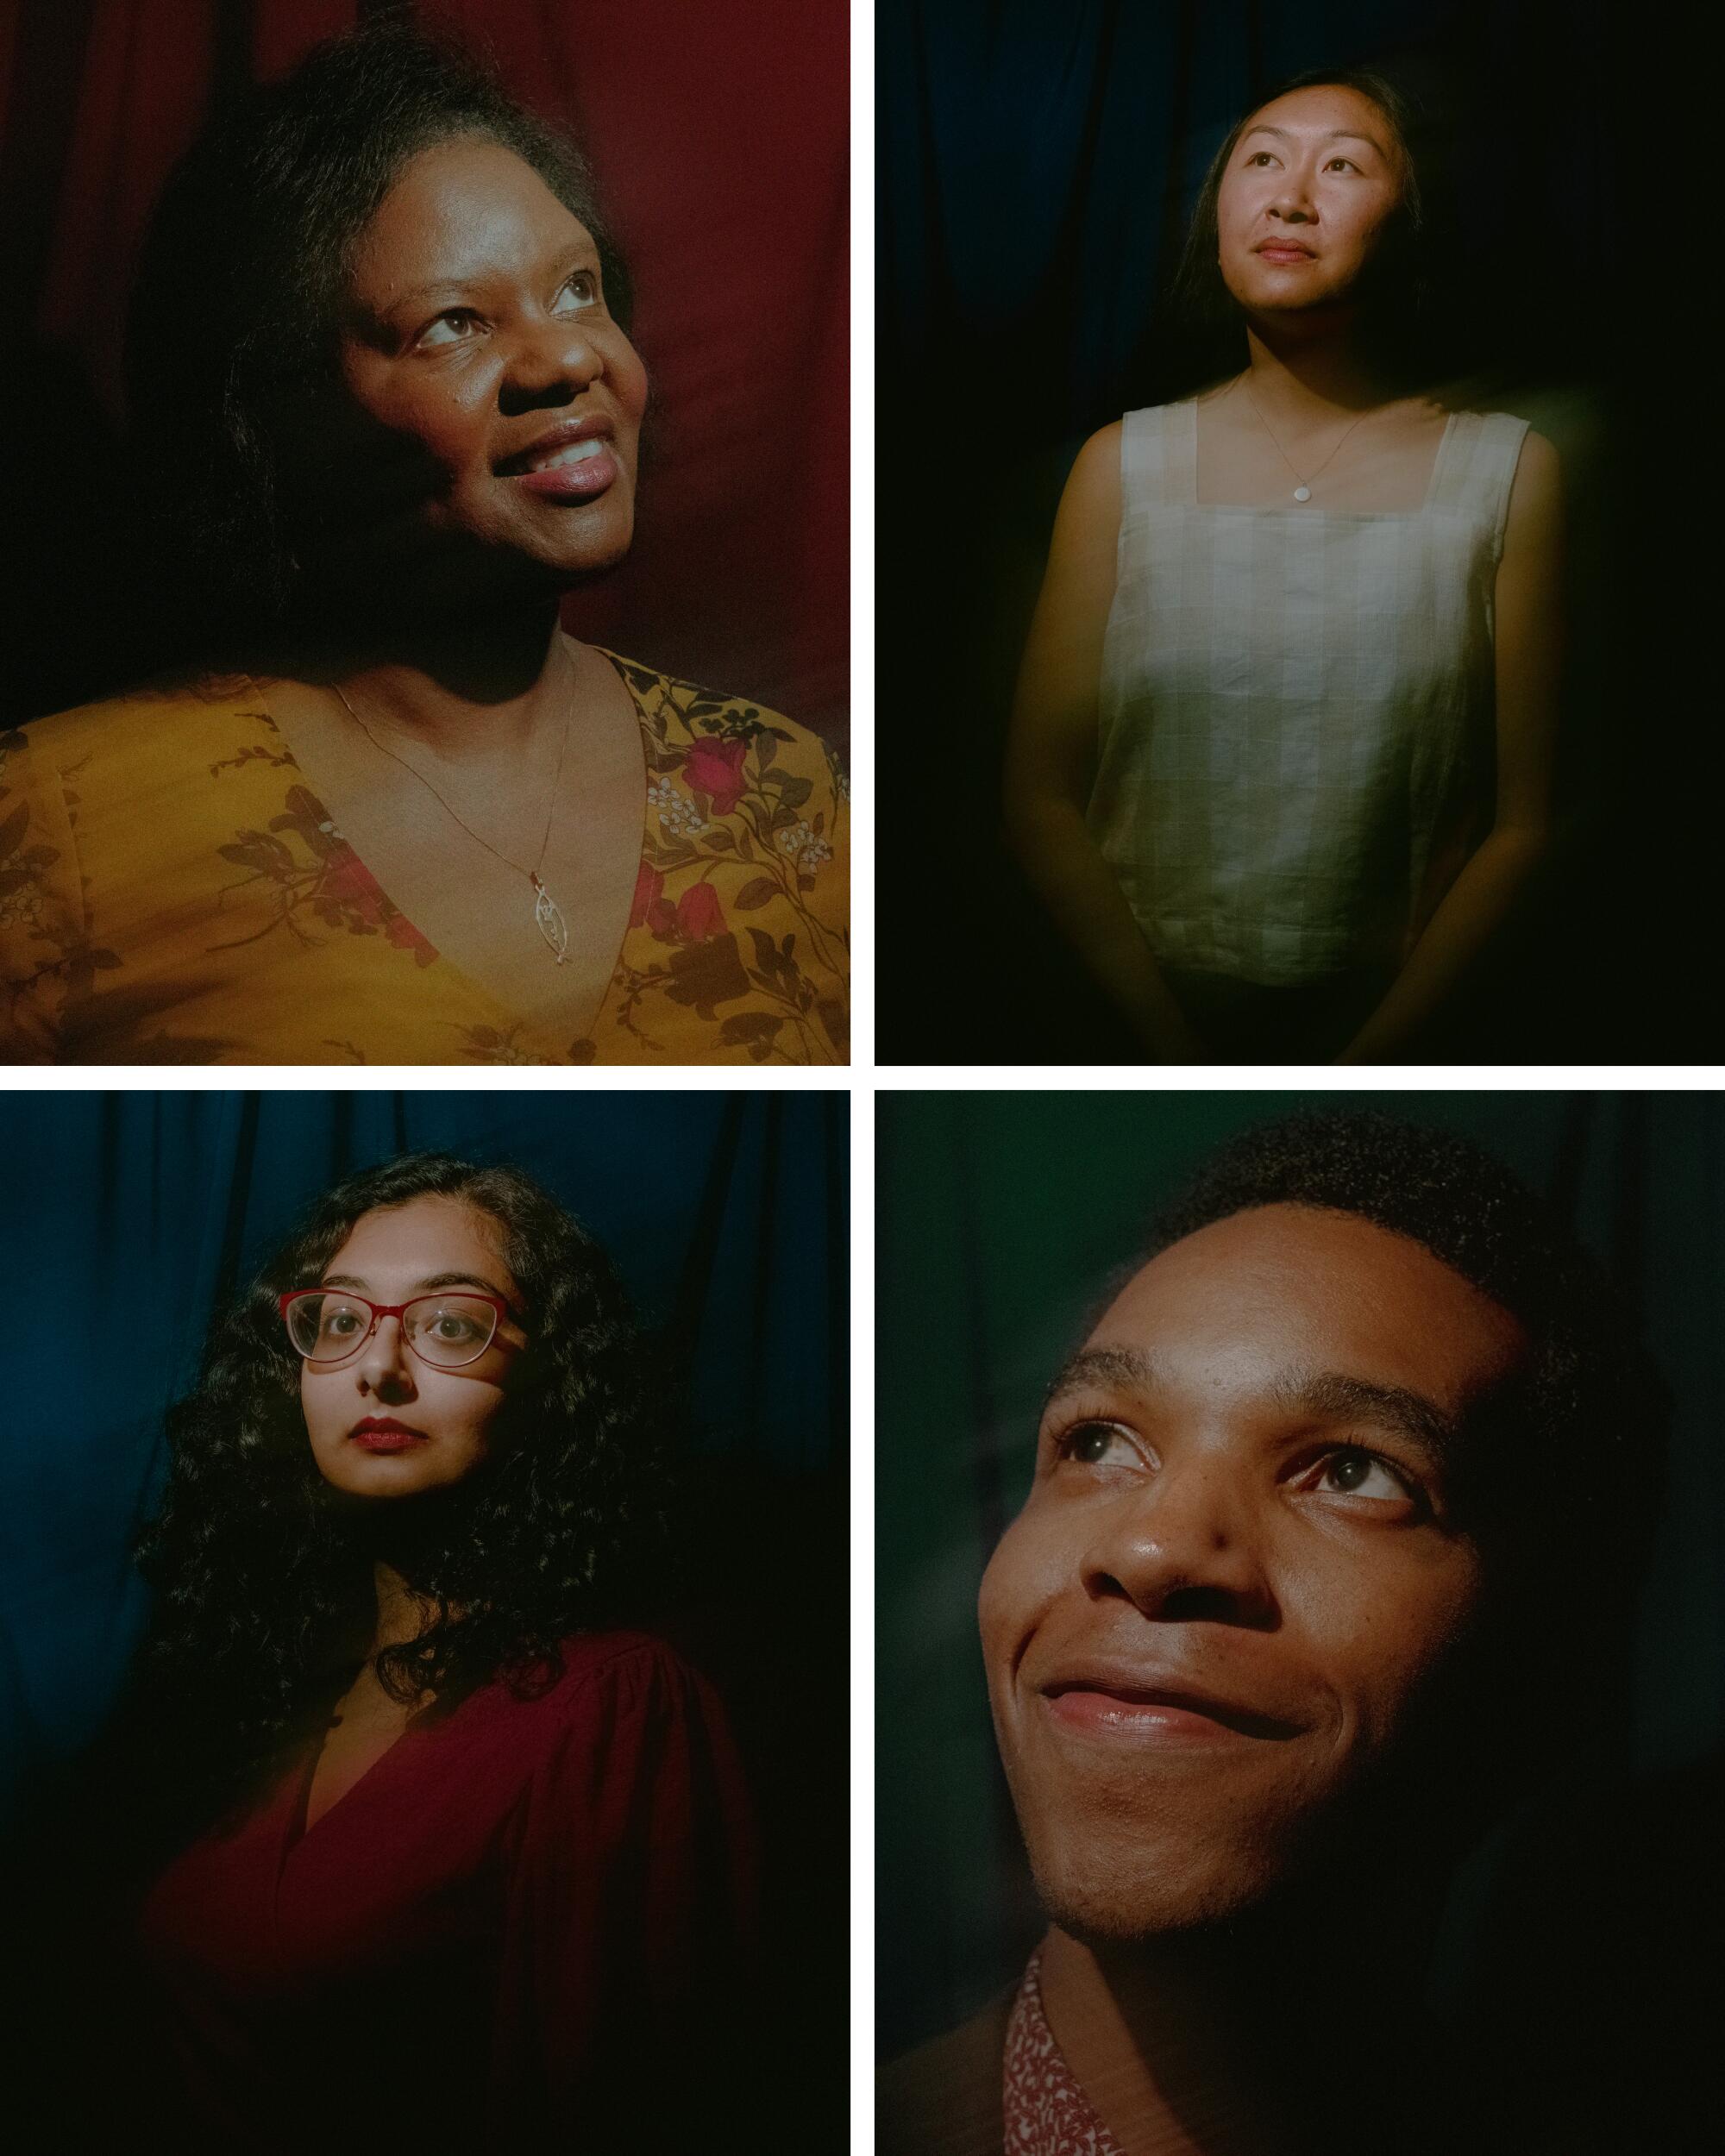 A grid of four images shows four portraits of people in front of red, green and blue backgrounds